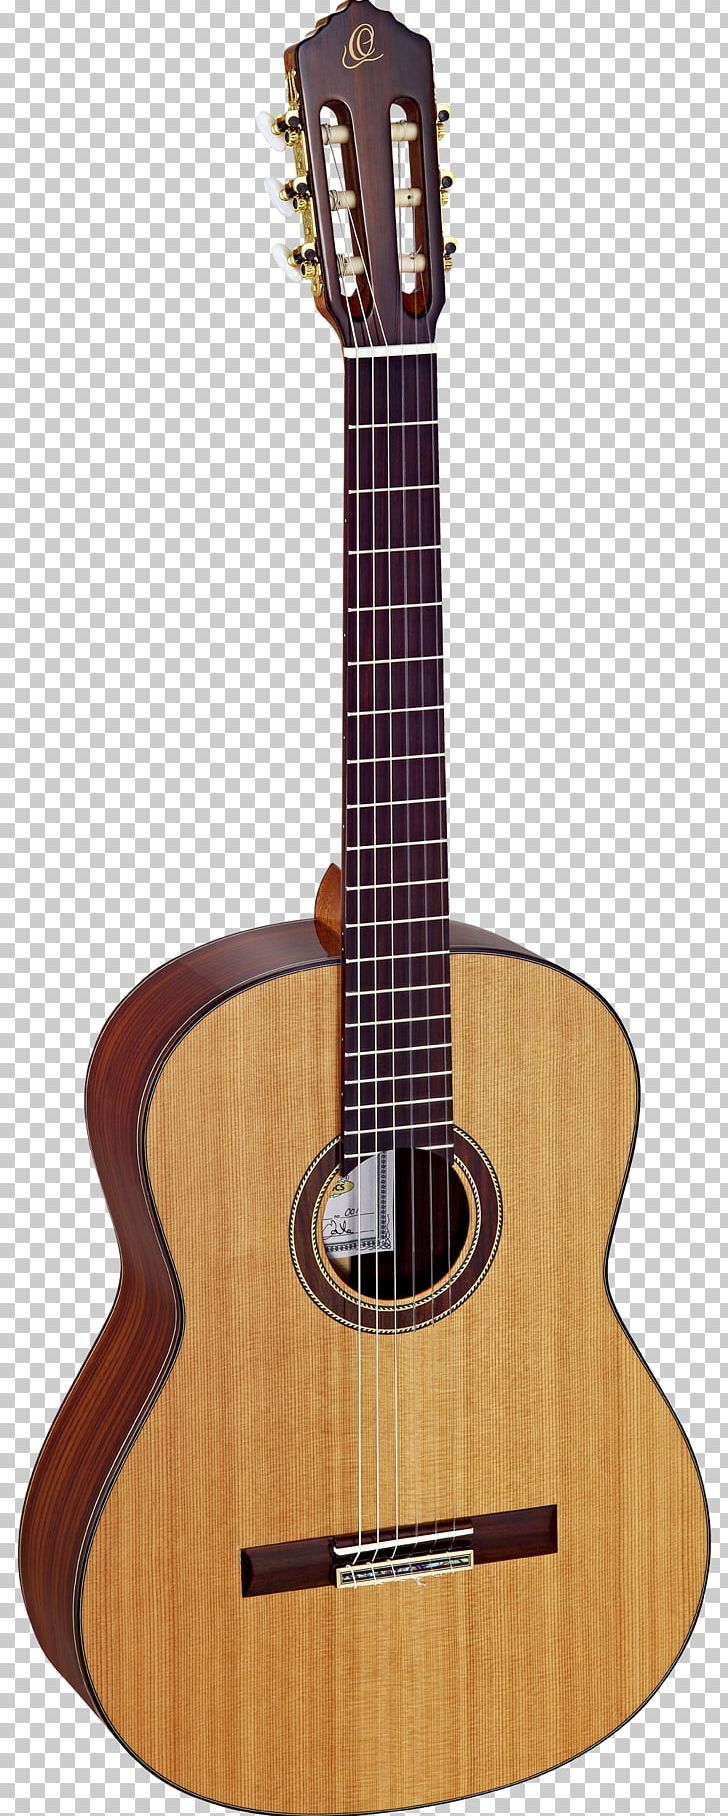 Taylor Guitars Steel-string Acoustic Guitar Classical Guitar Musical Instruments PNG, Clipart, Acoustic Electric Guitar, Amancio Ortega, Classical Guitar, Cuatro, Guitar Accessory Free PNG Download